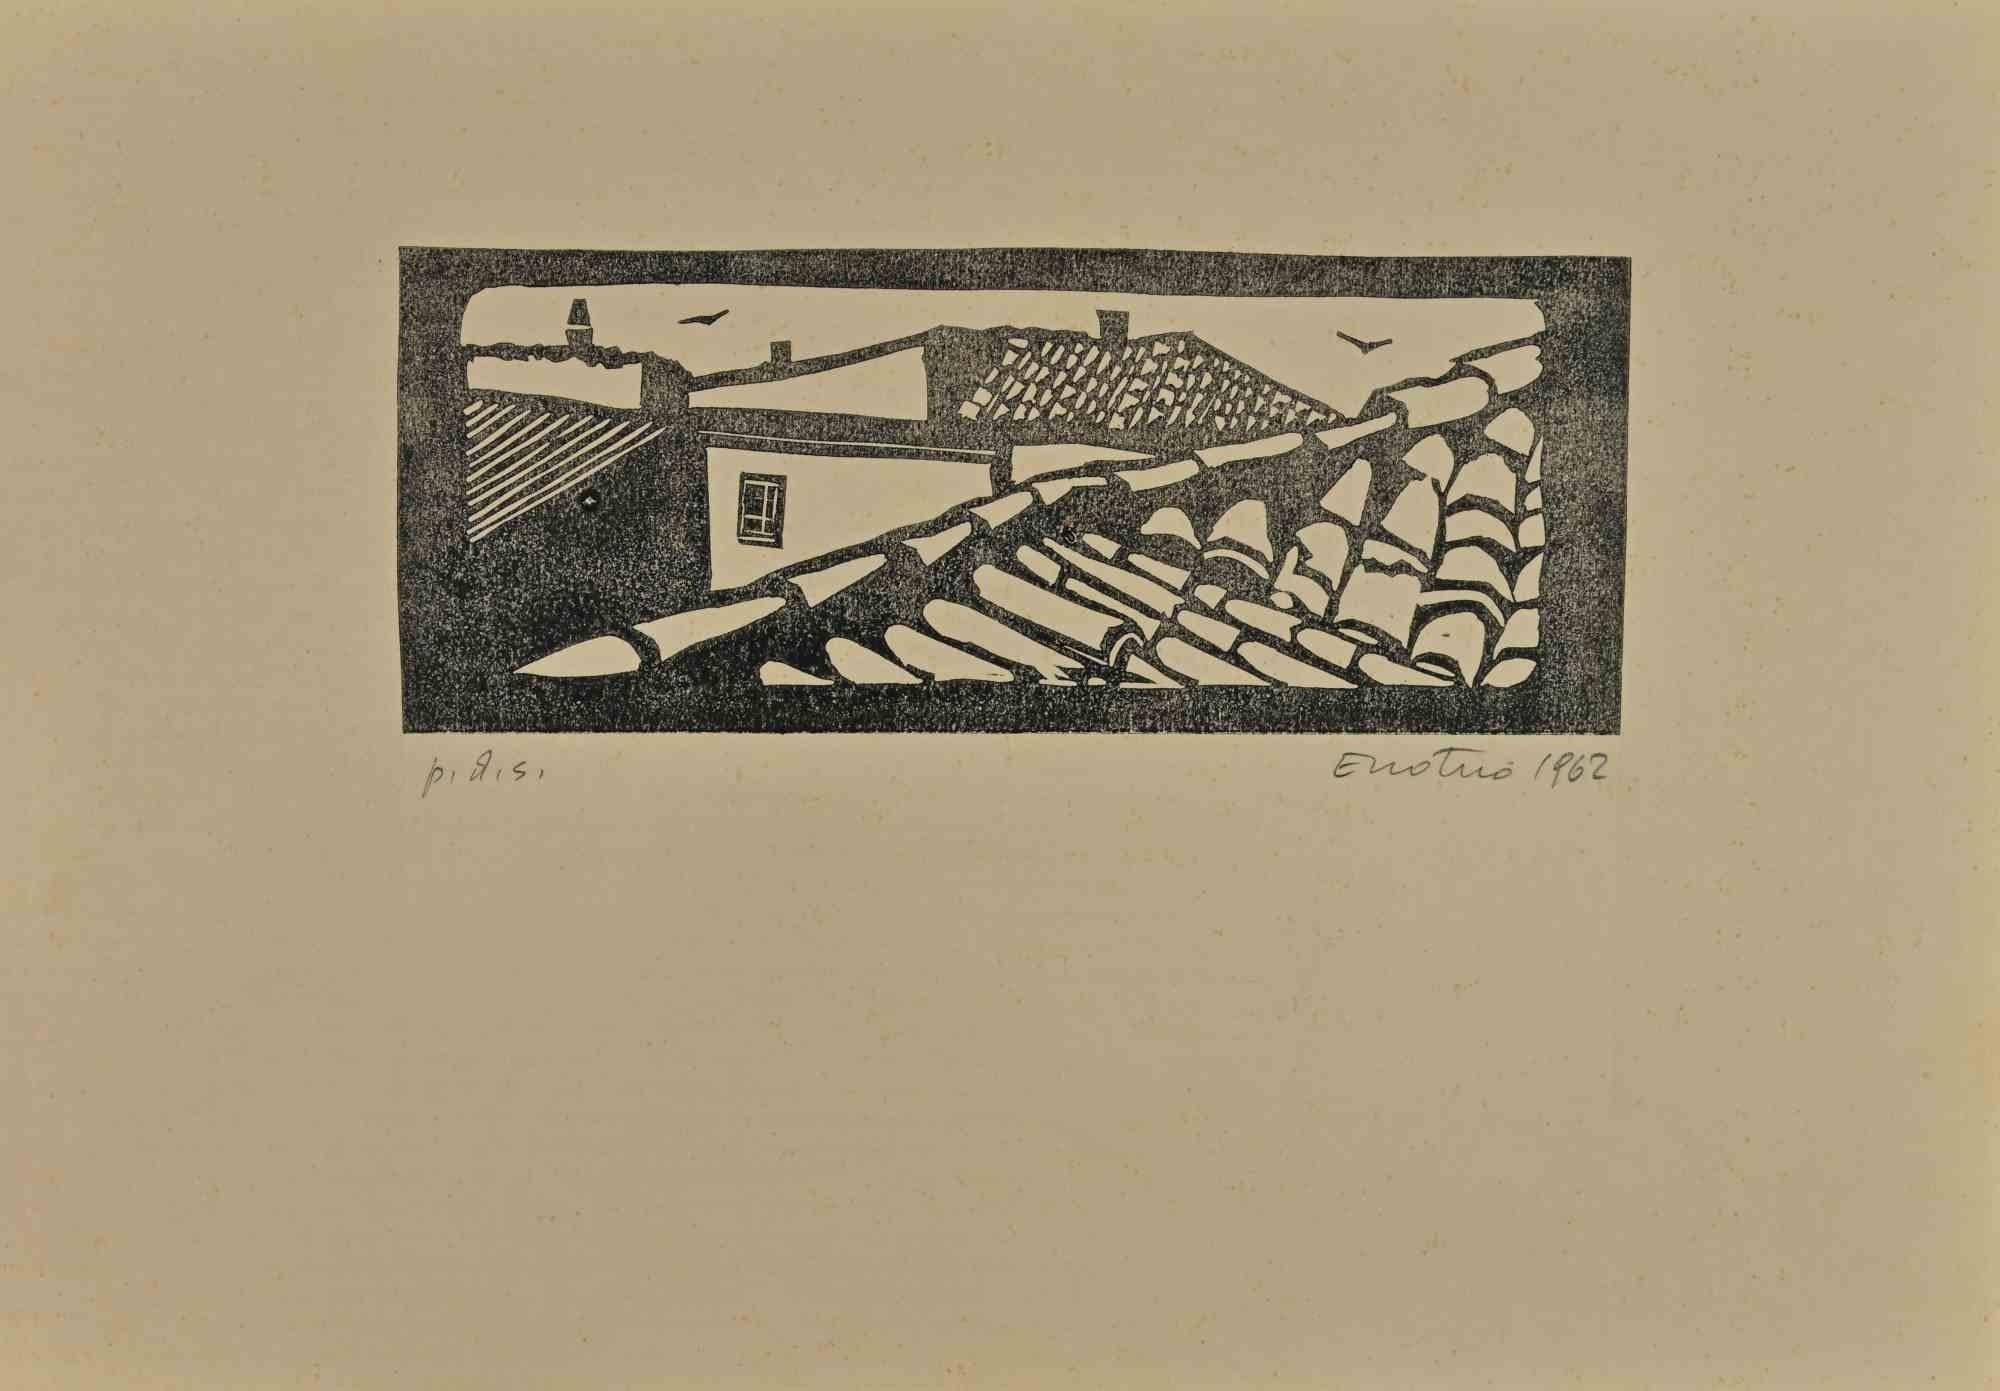 Roofs of Rome is a woodcut print realized by Enotrio Pugliese in 1962.

Proof of artist, Limited edition of 50 copies numbered and signed by the artist.

Good condition on a cream colored cardboard.

Enotrio Pugliese (May 11, 1920 - August 1989) was